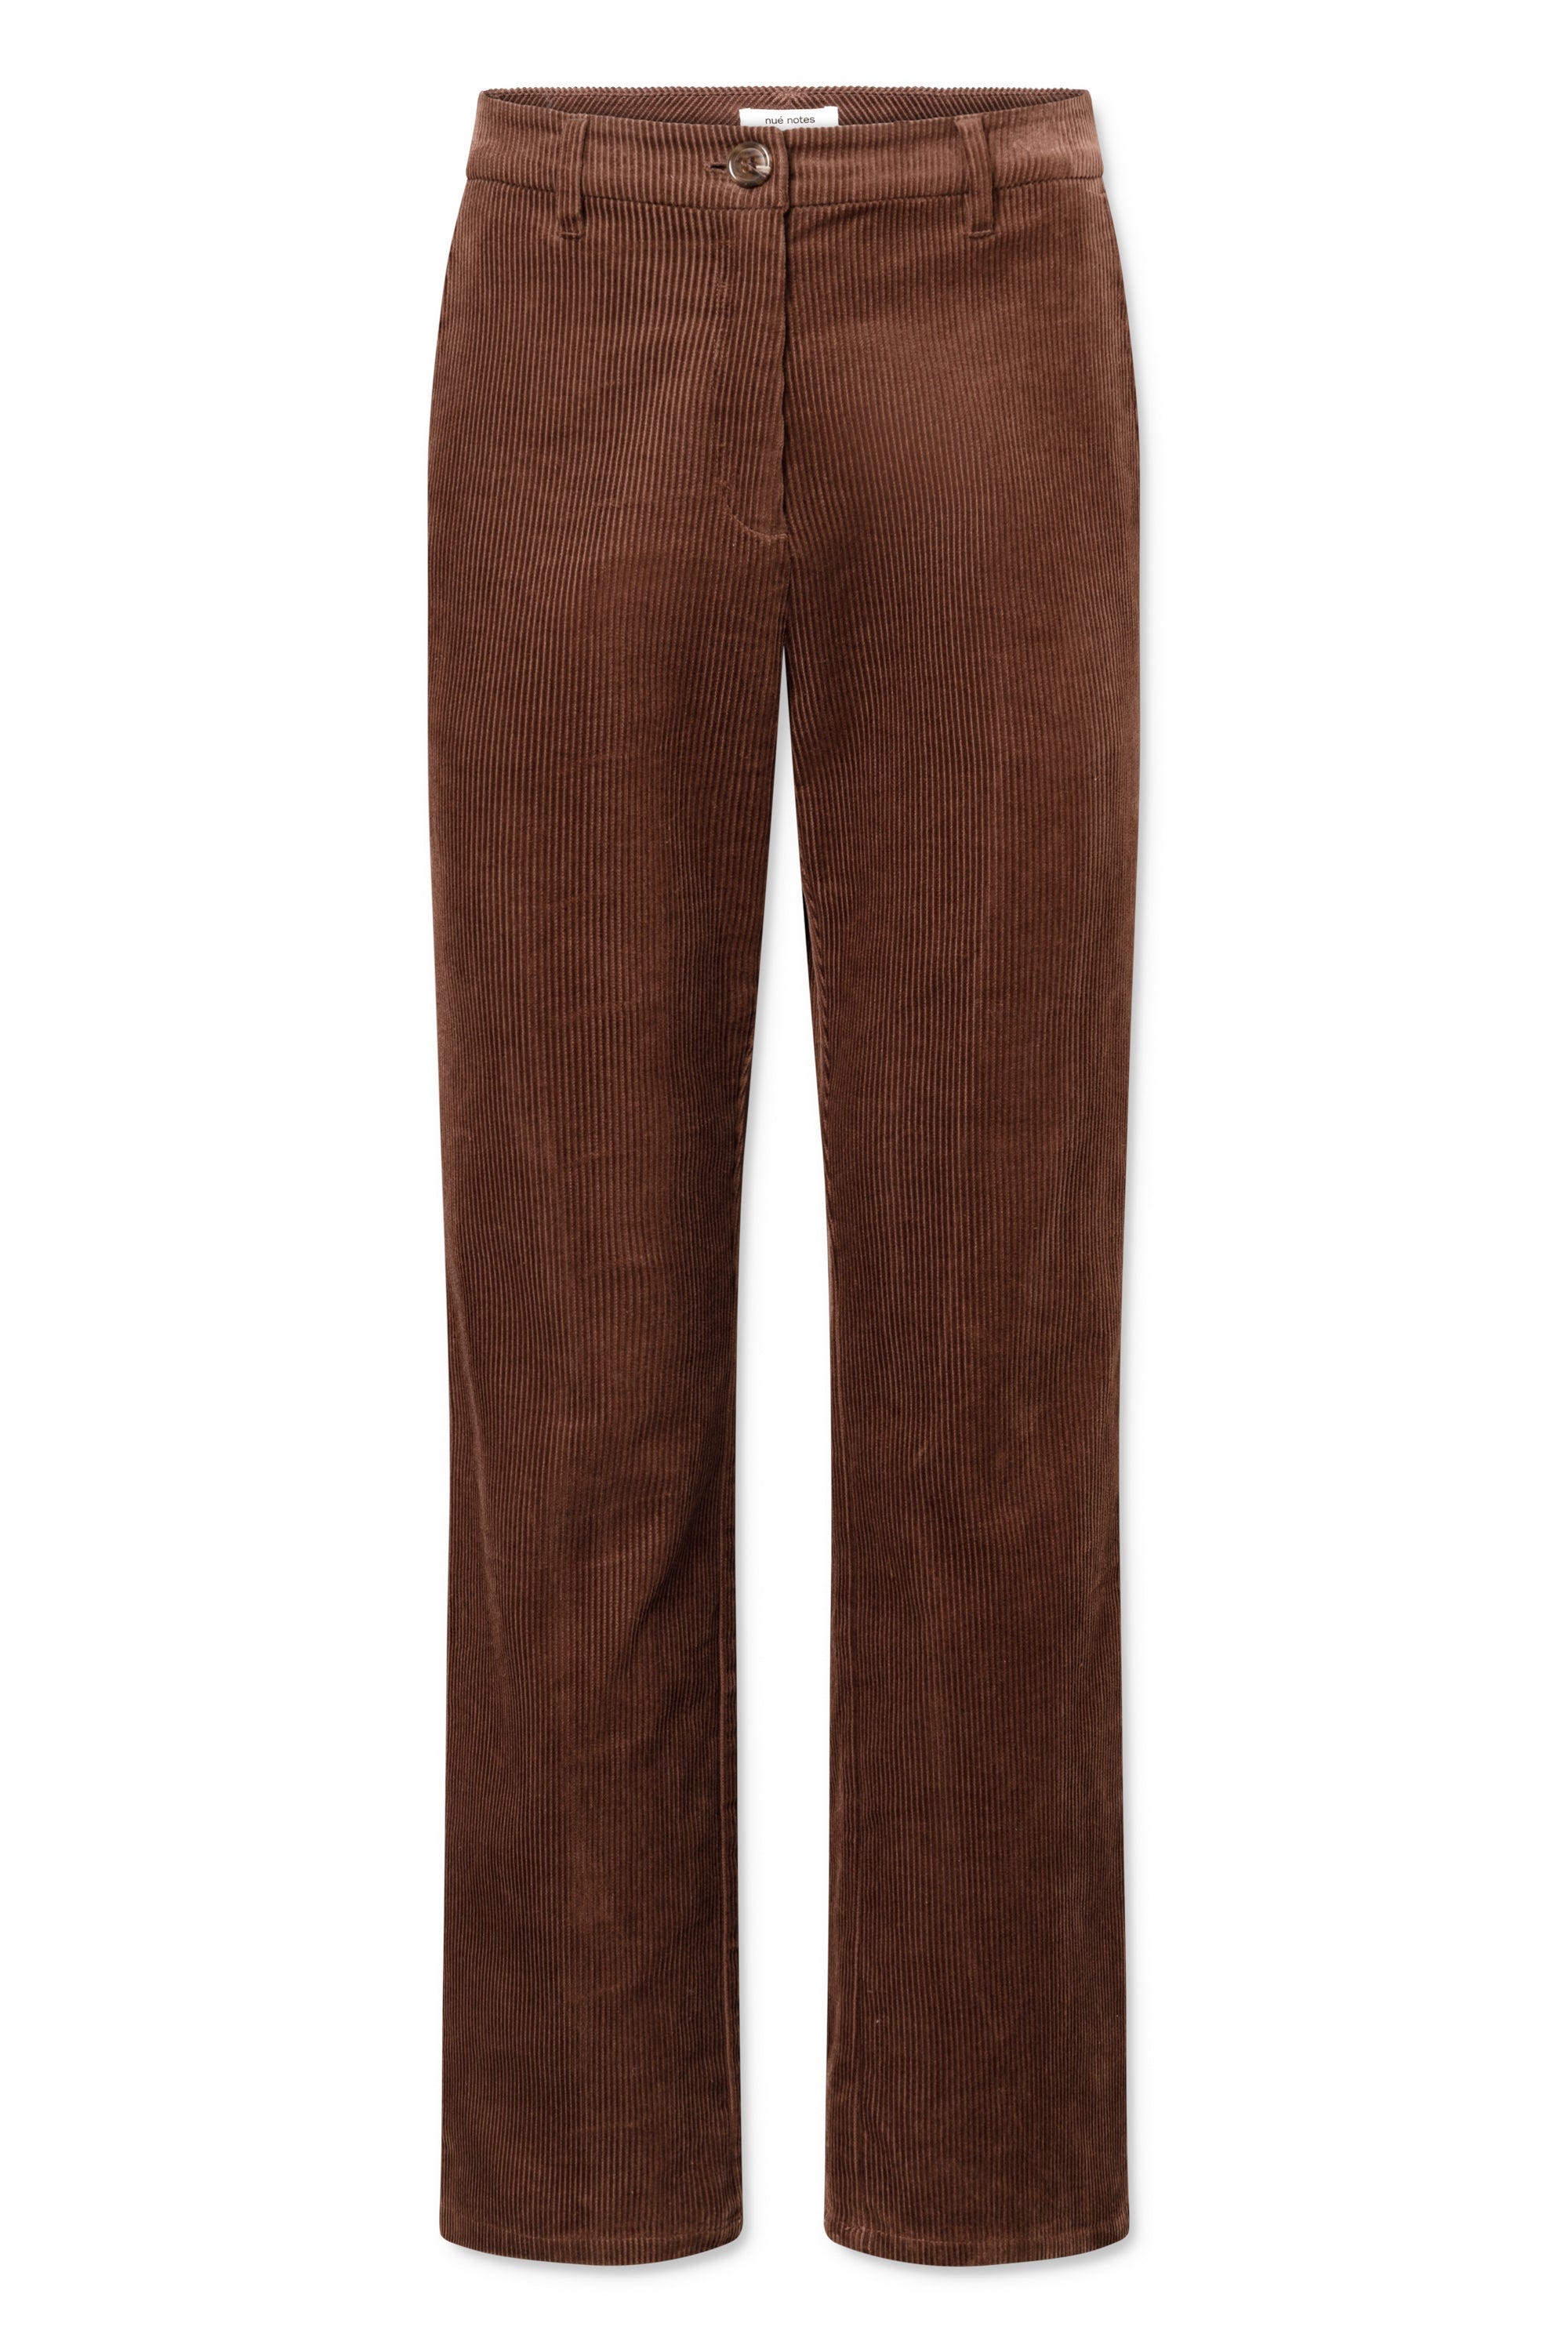 Judy Blue | Mid Rise Corduroy Pants | All That Glitters